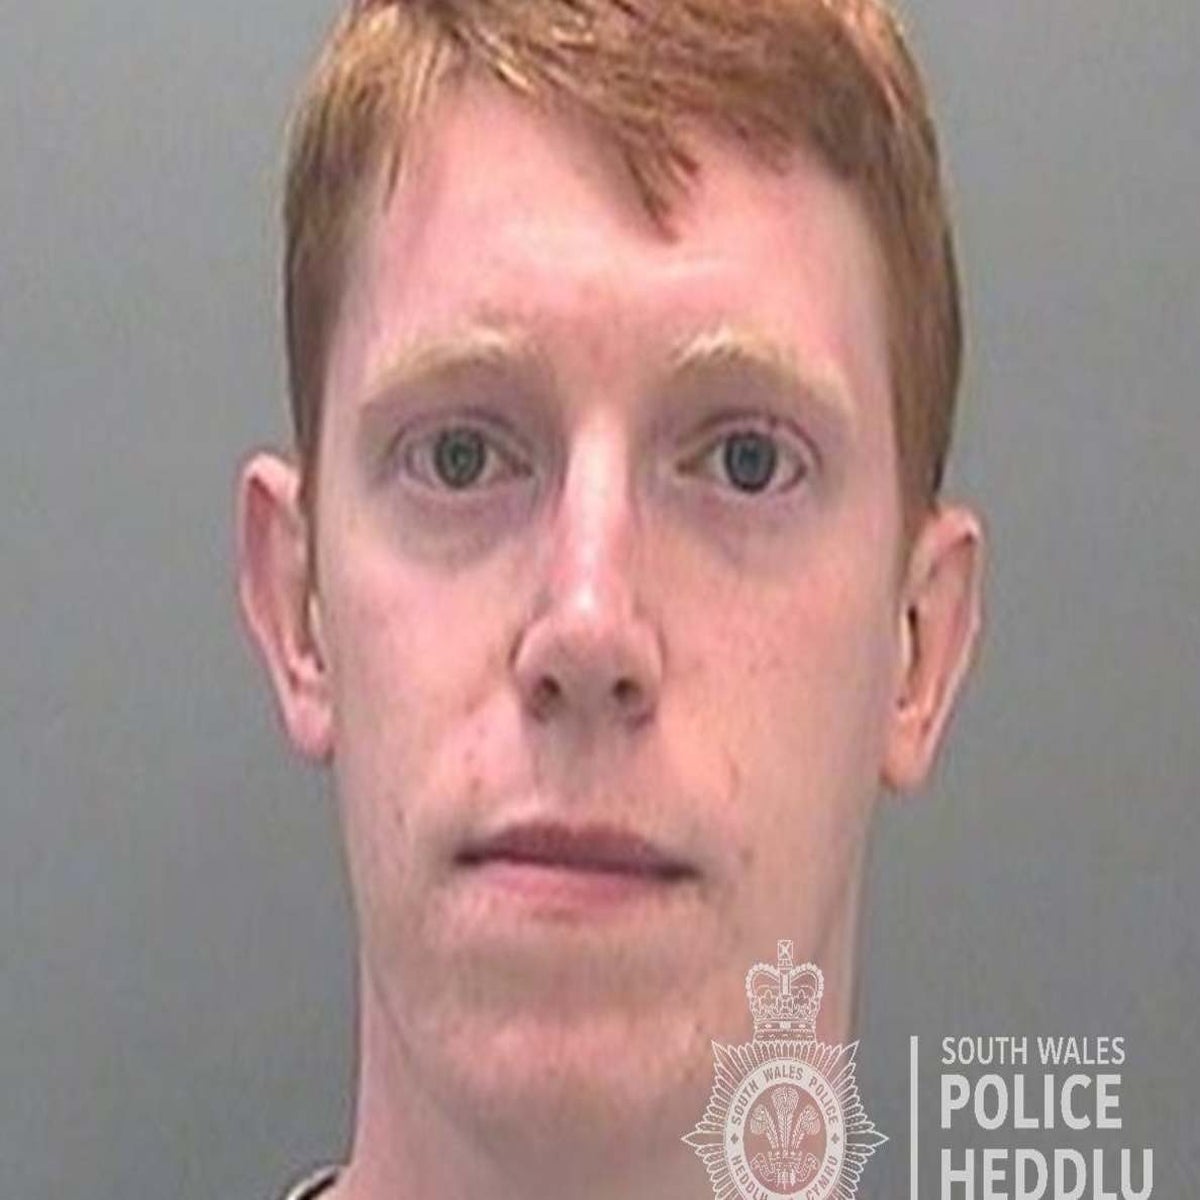 Xxx Little Bay Video - Army cadet trainer tricked boys into performing sex acts by posing as  15-year-old girl 'bait' | The Independent | The Independent